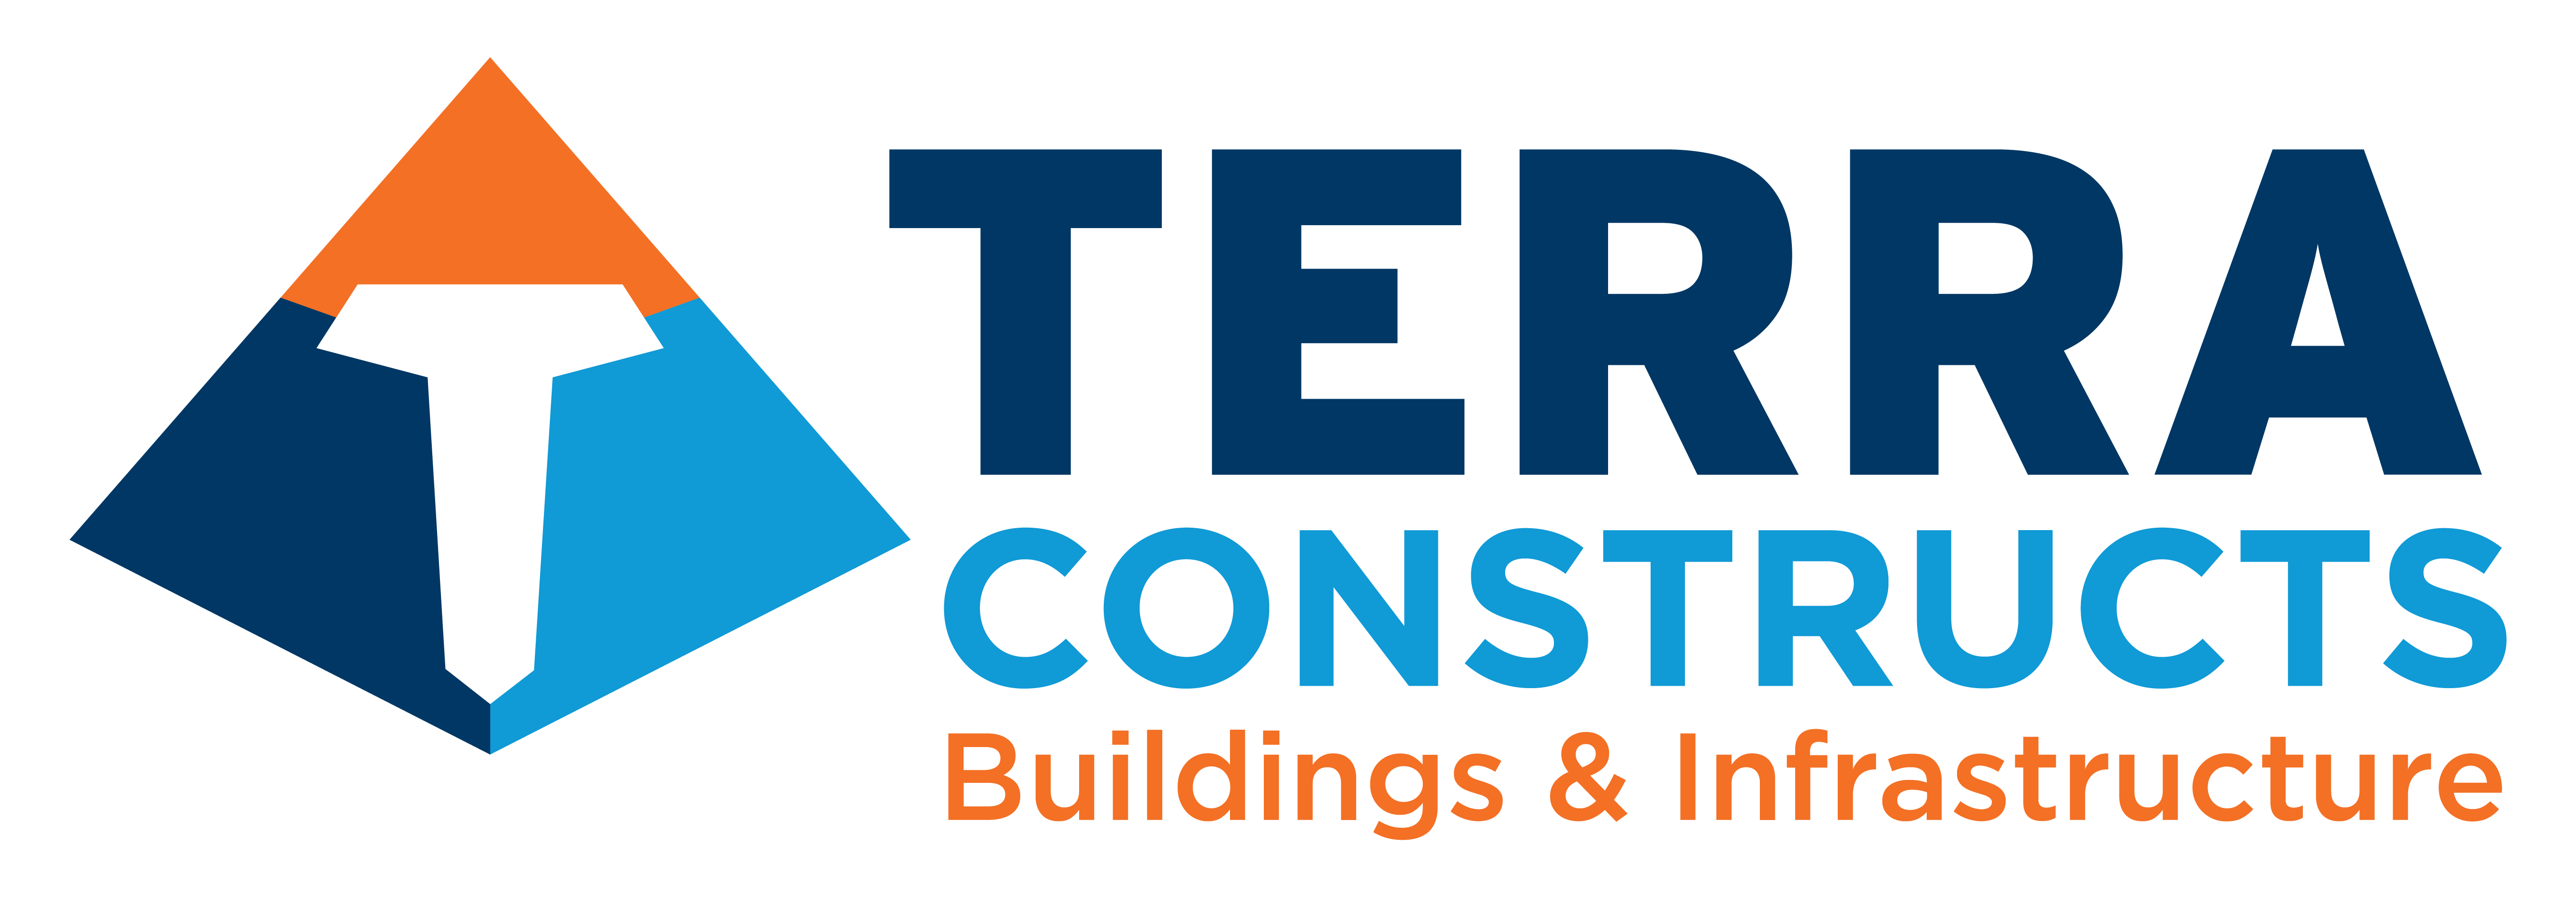 Celebrating 10 Years of Excellence: Terra Site Constructors Rebrands to Terra Constructs